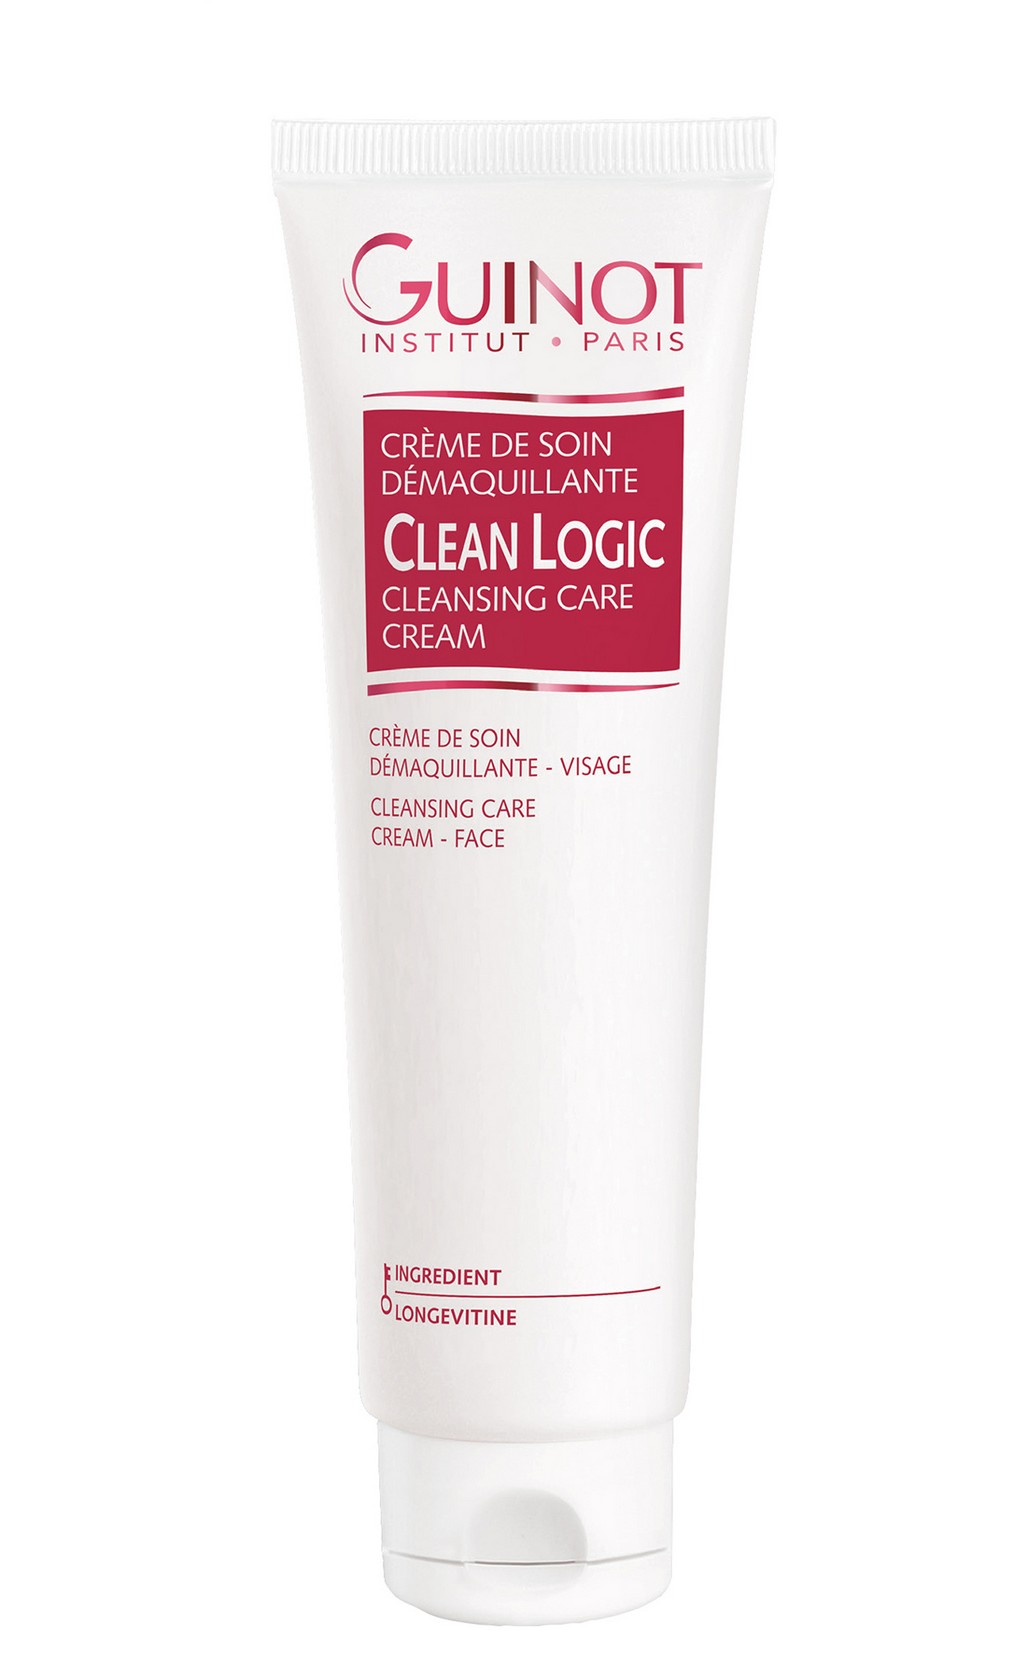 Cleansing creme. Guinot longue vie yeux 30 мл. Guinot Creme Anti-Rides 50 мл. Guinot Creme Pur equilibre. Guinot longue vie yeux (туба 30 мл).